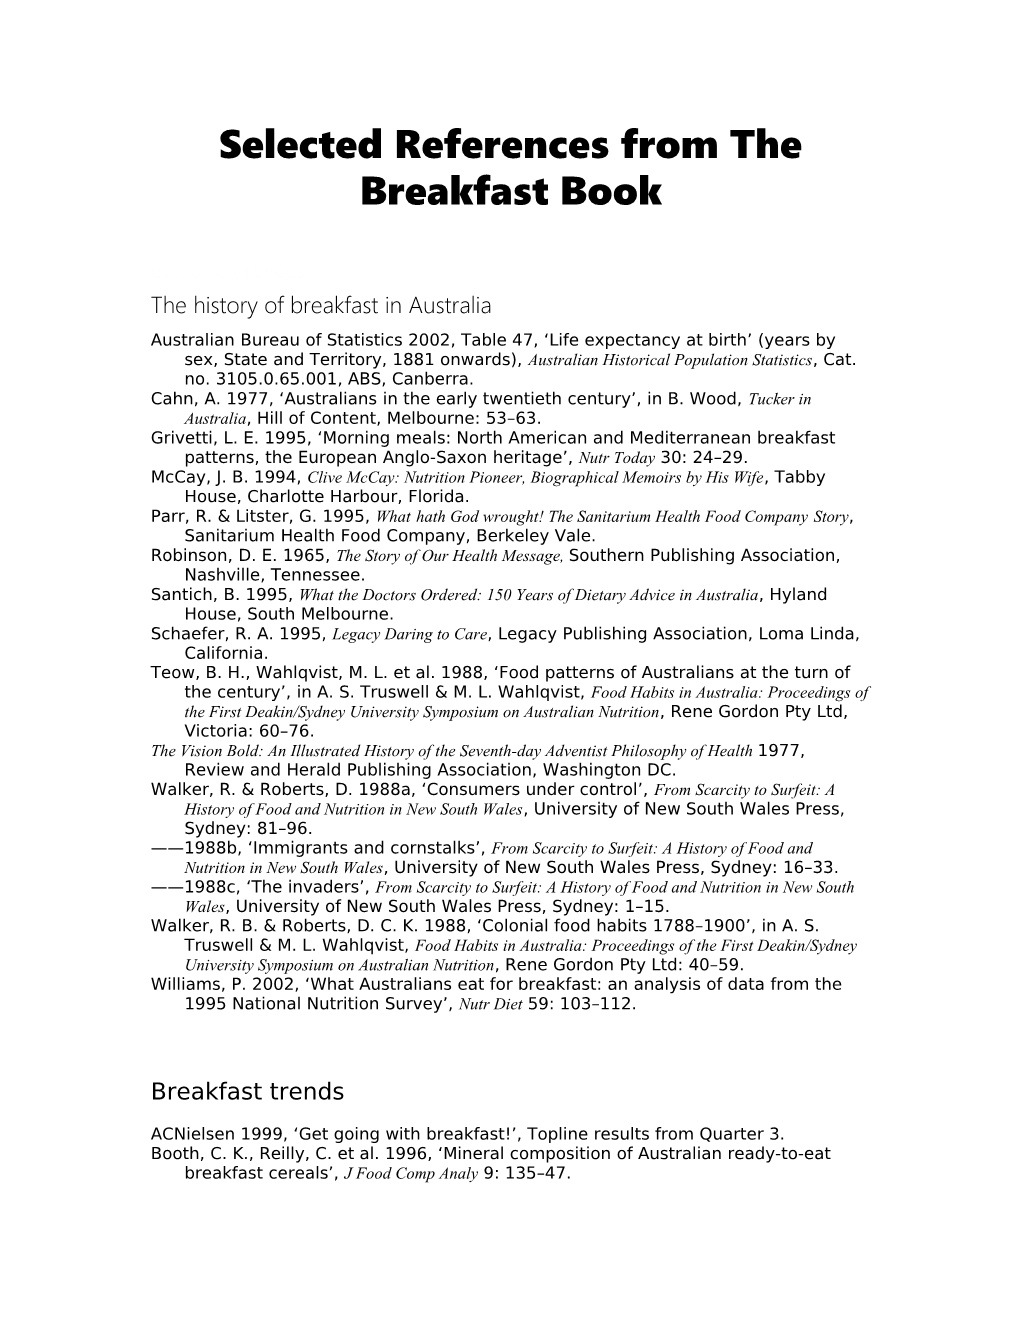 Selected References from the Breakfast Book